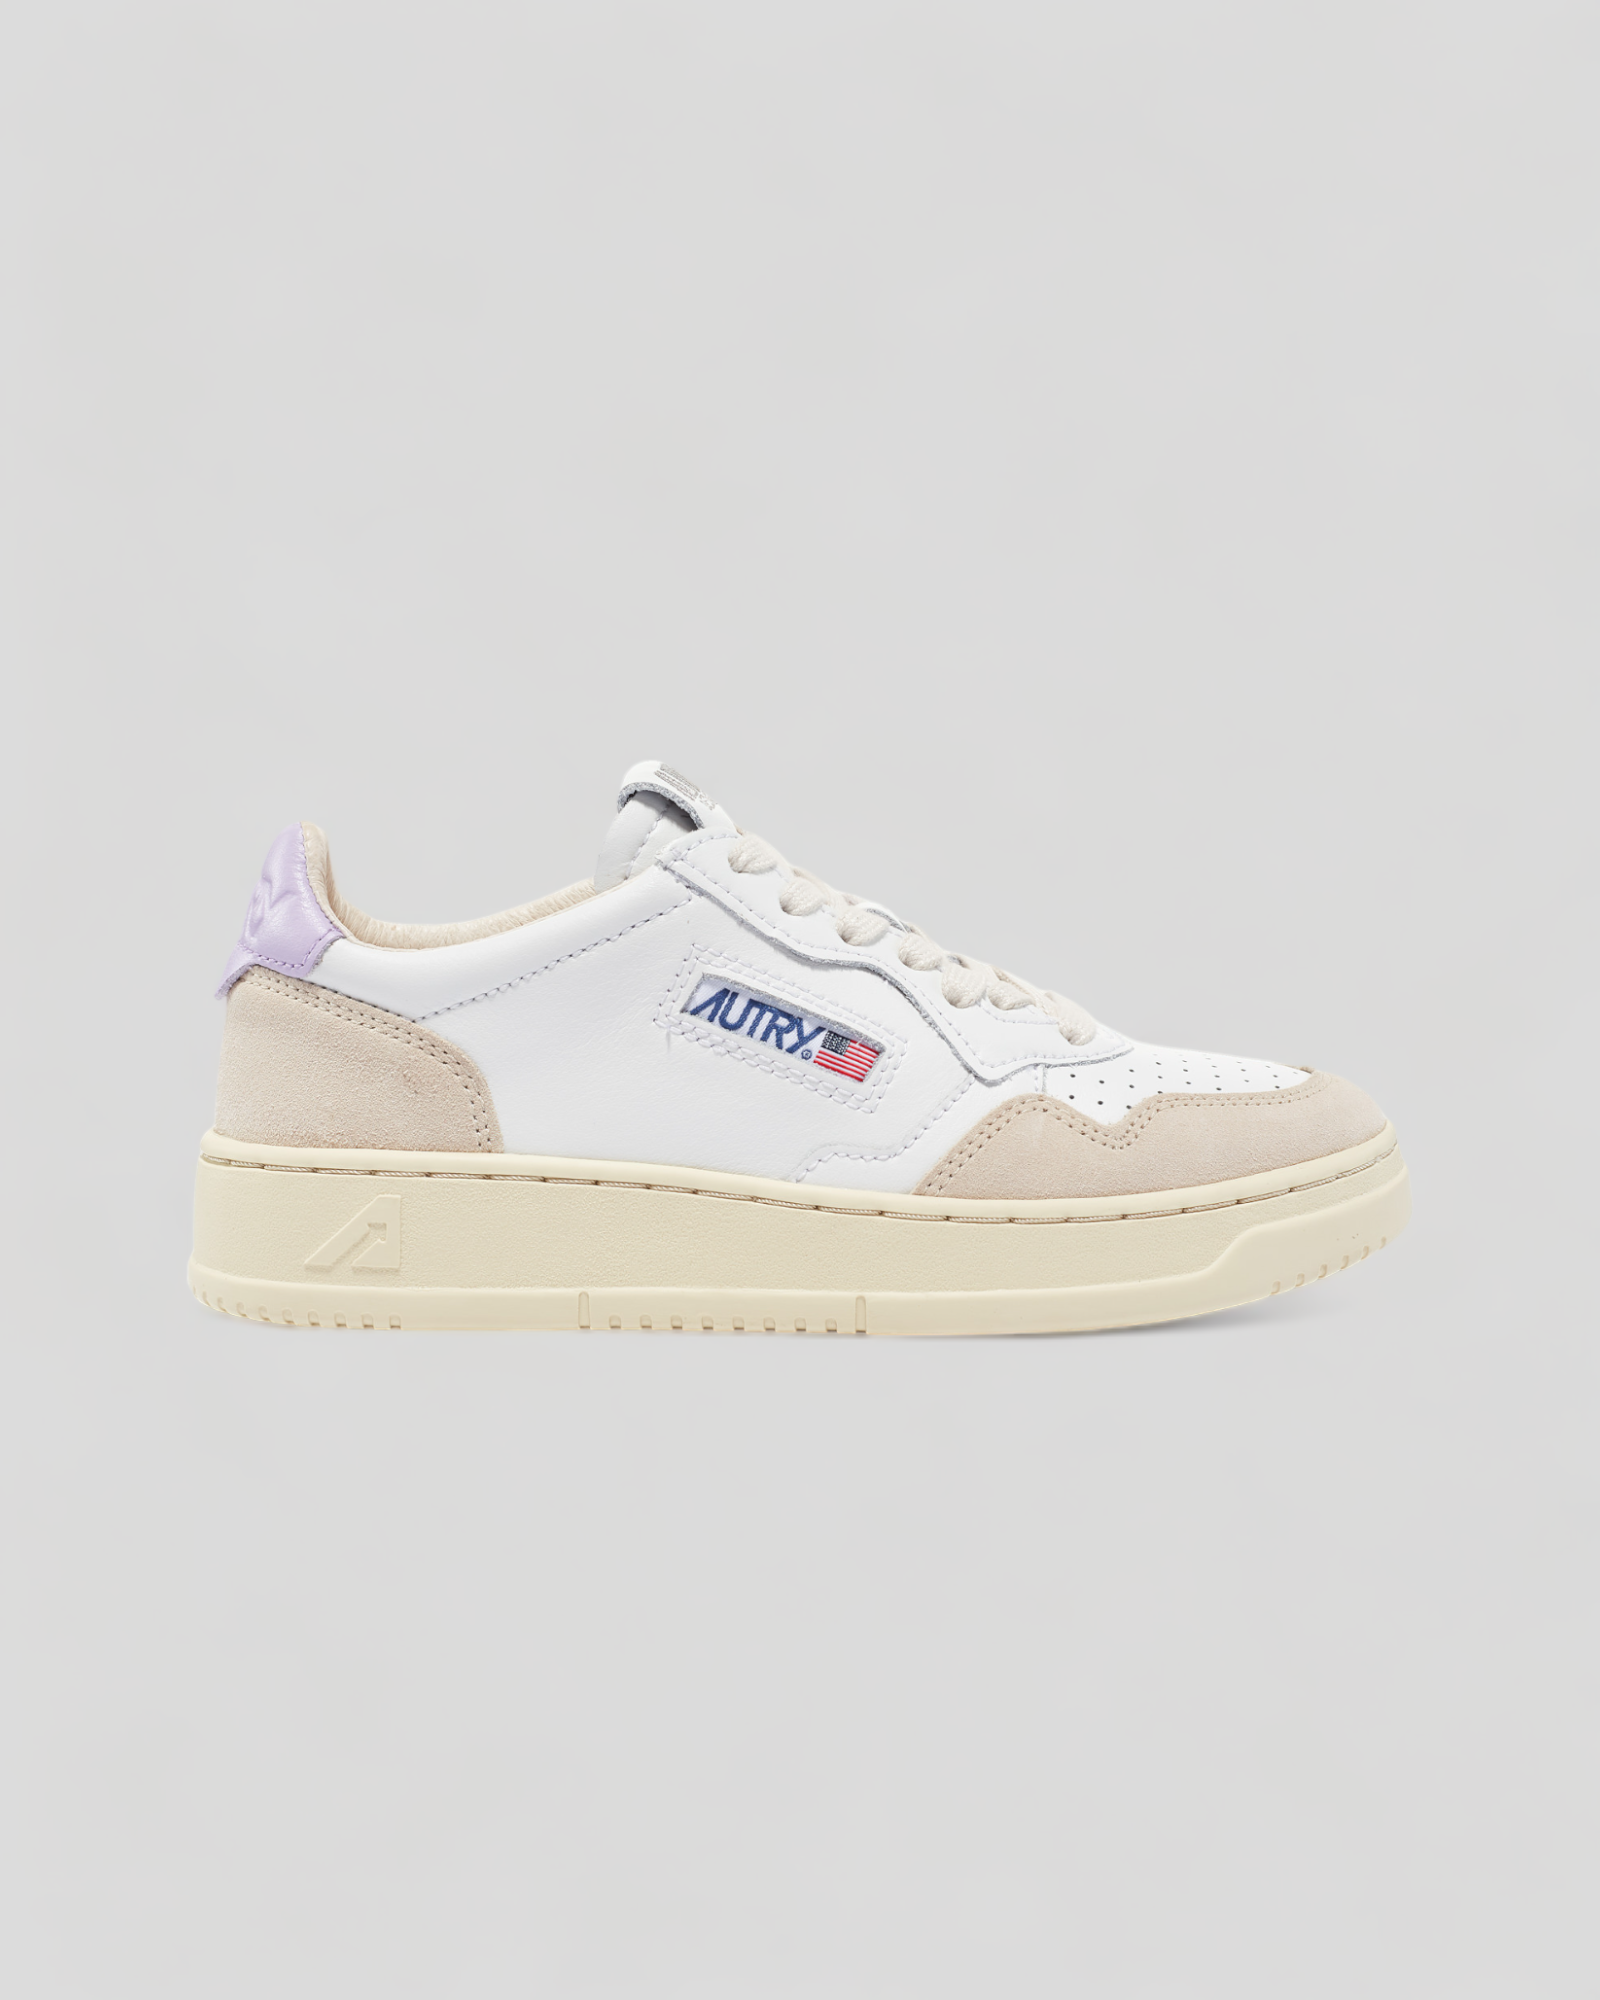 Autry || Medalist - SL68 - Leat/ Suede White/ Lilac